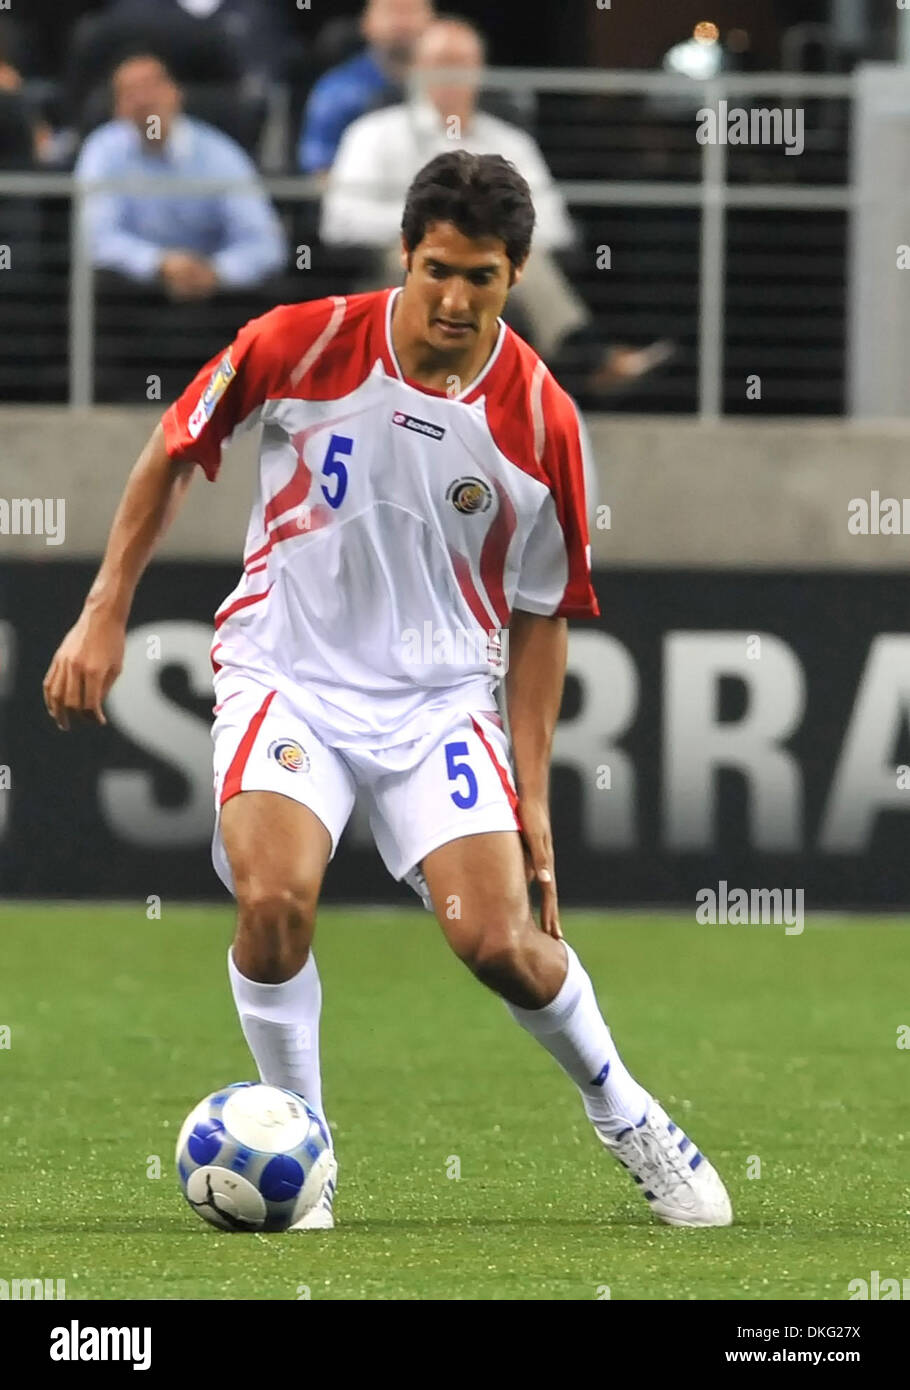 Jul 19, 2009 - Arlington, Texas, United States of America - CONCACAF Gold Cup 2009 Quarterfinals - Guadeloupe vs Costa Rica. Team Costa Rica wins the match 5-1.  Costa Rican midfielder CELSO BORGES dribbles the ball. (Credit Image: © Steven Leija/Southcreek Global/ZUMA Press) Stock Photo